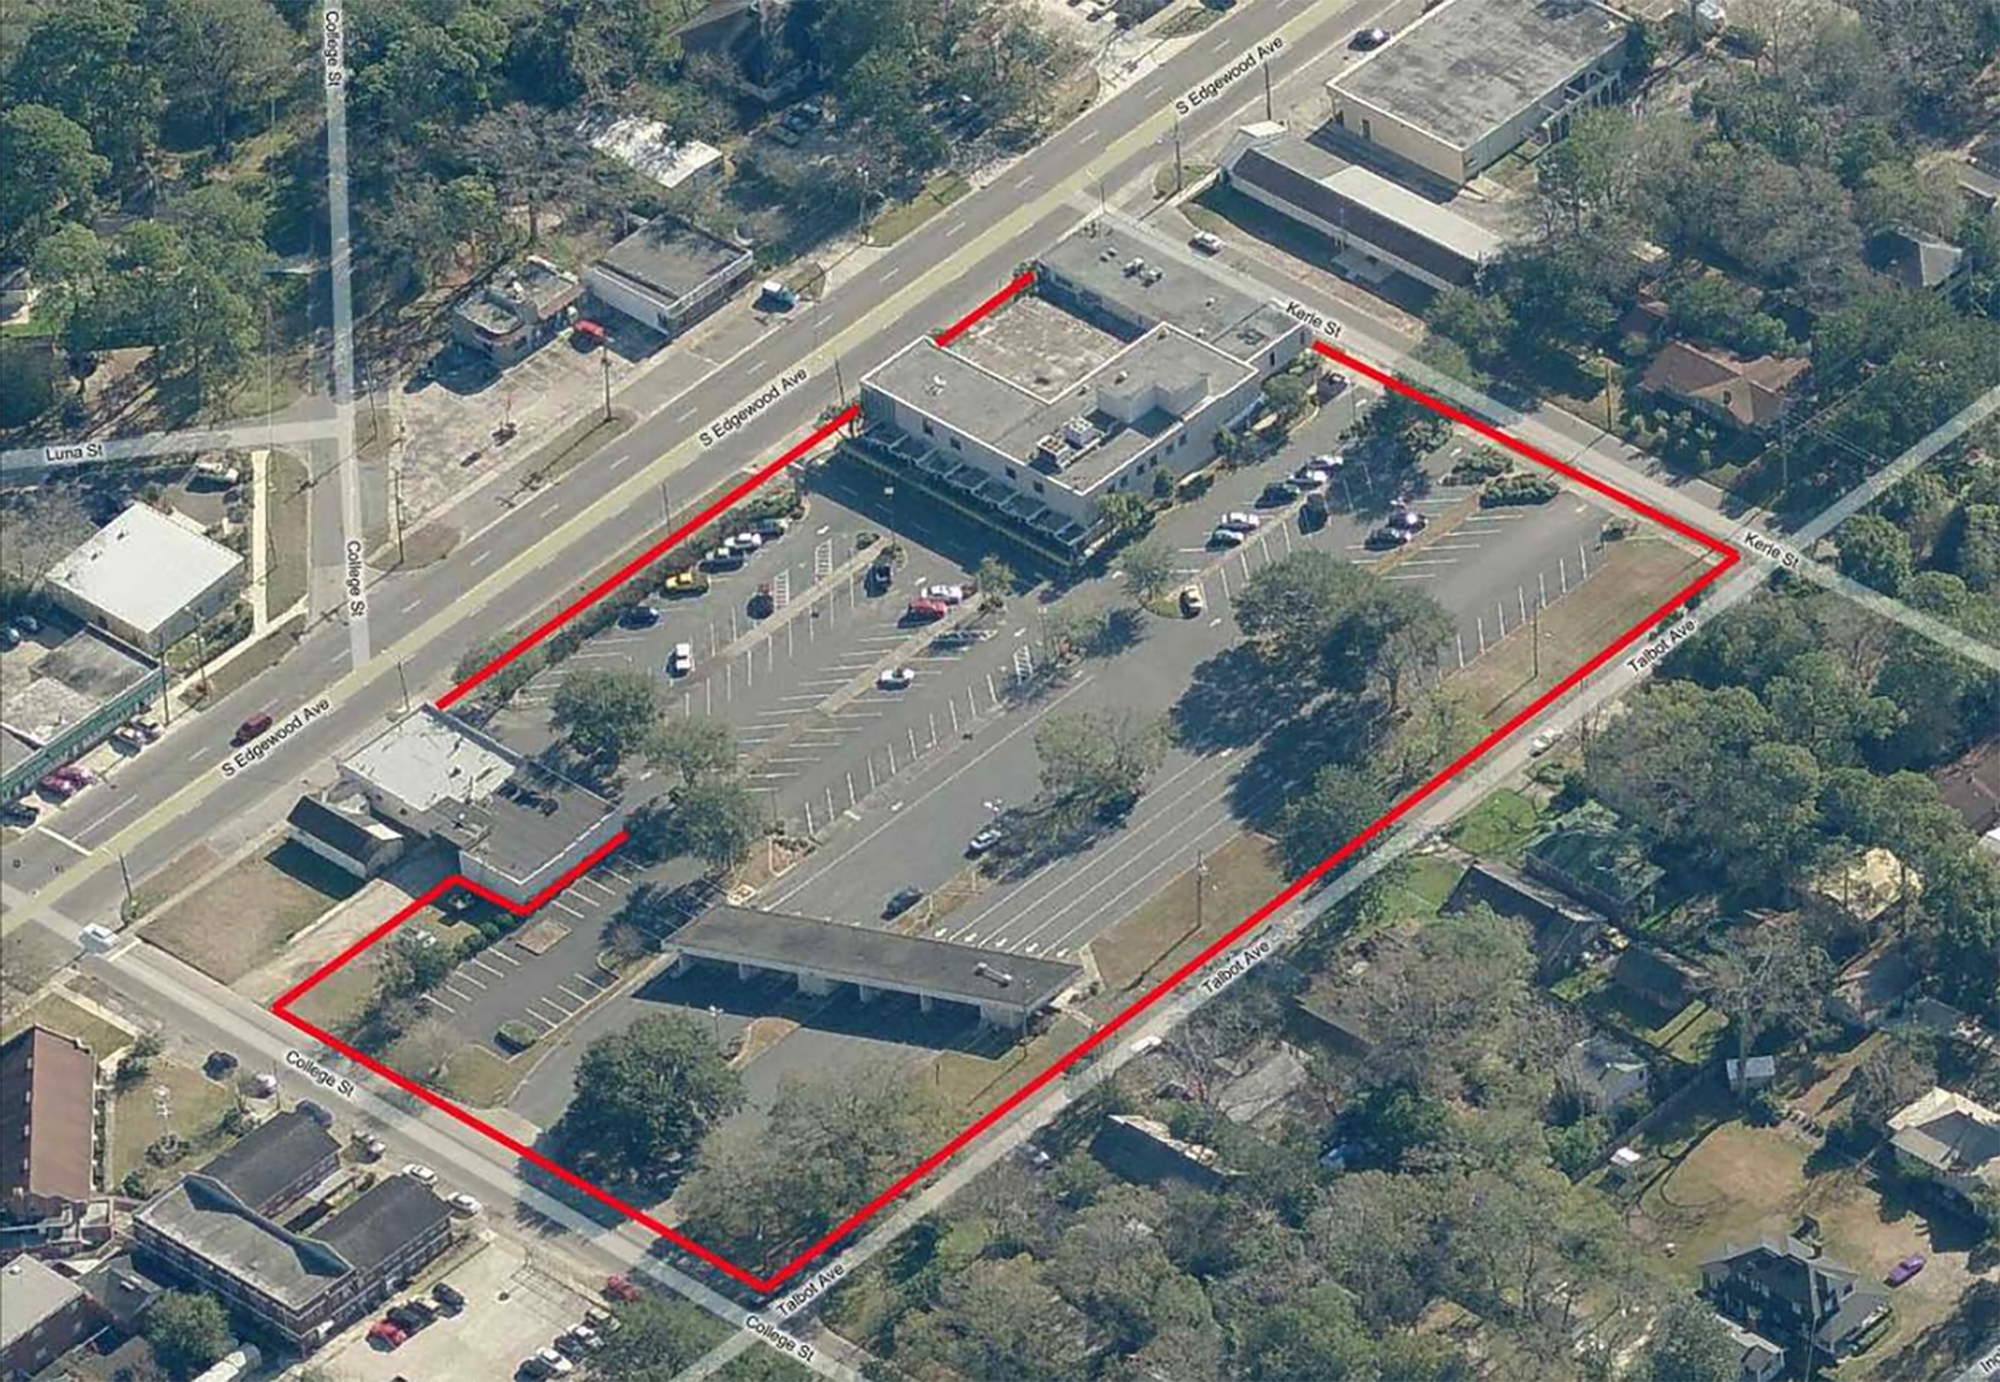 Vestcor proposes to redevelop the former Bank of America property and parking lot on 3.69 acres at 840 Edgewood Ave. S., at northwest Edgewood Avenue and Kerle Street.